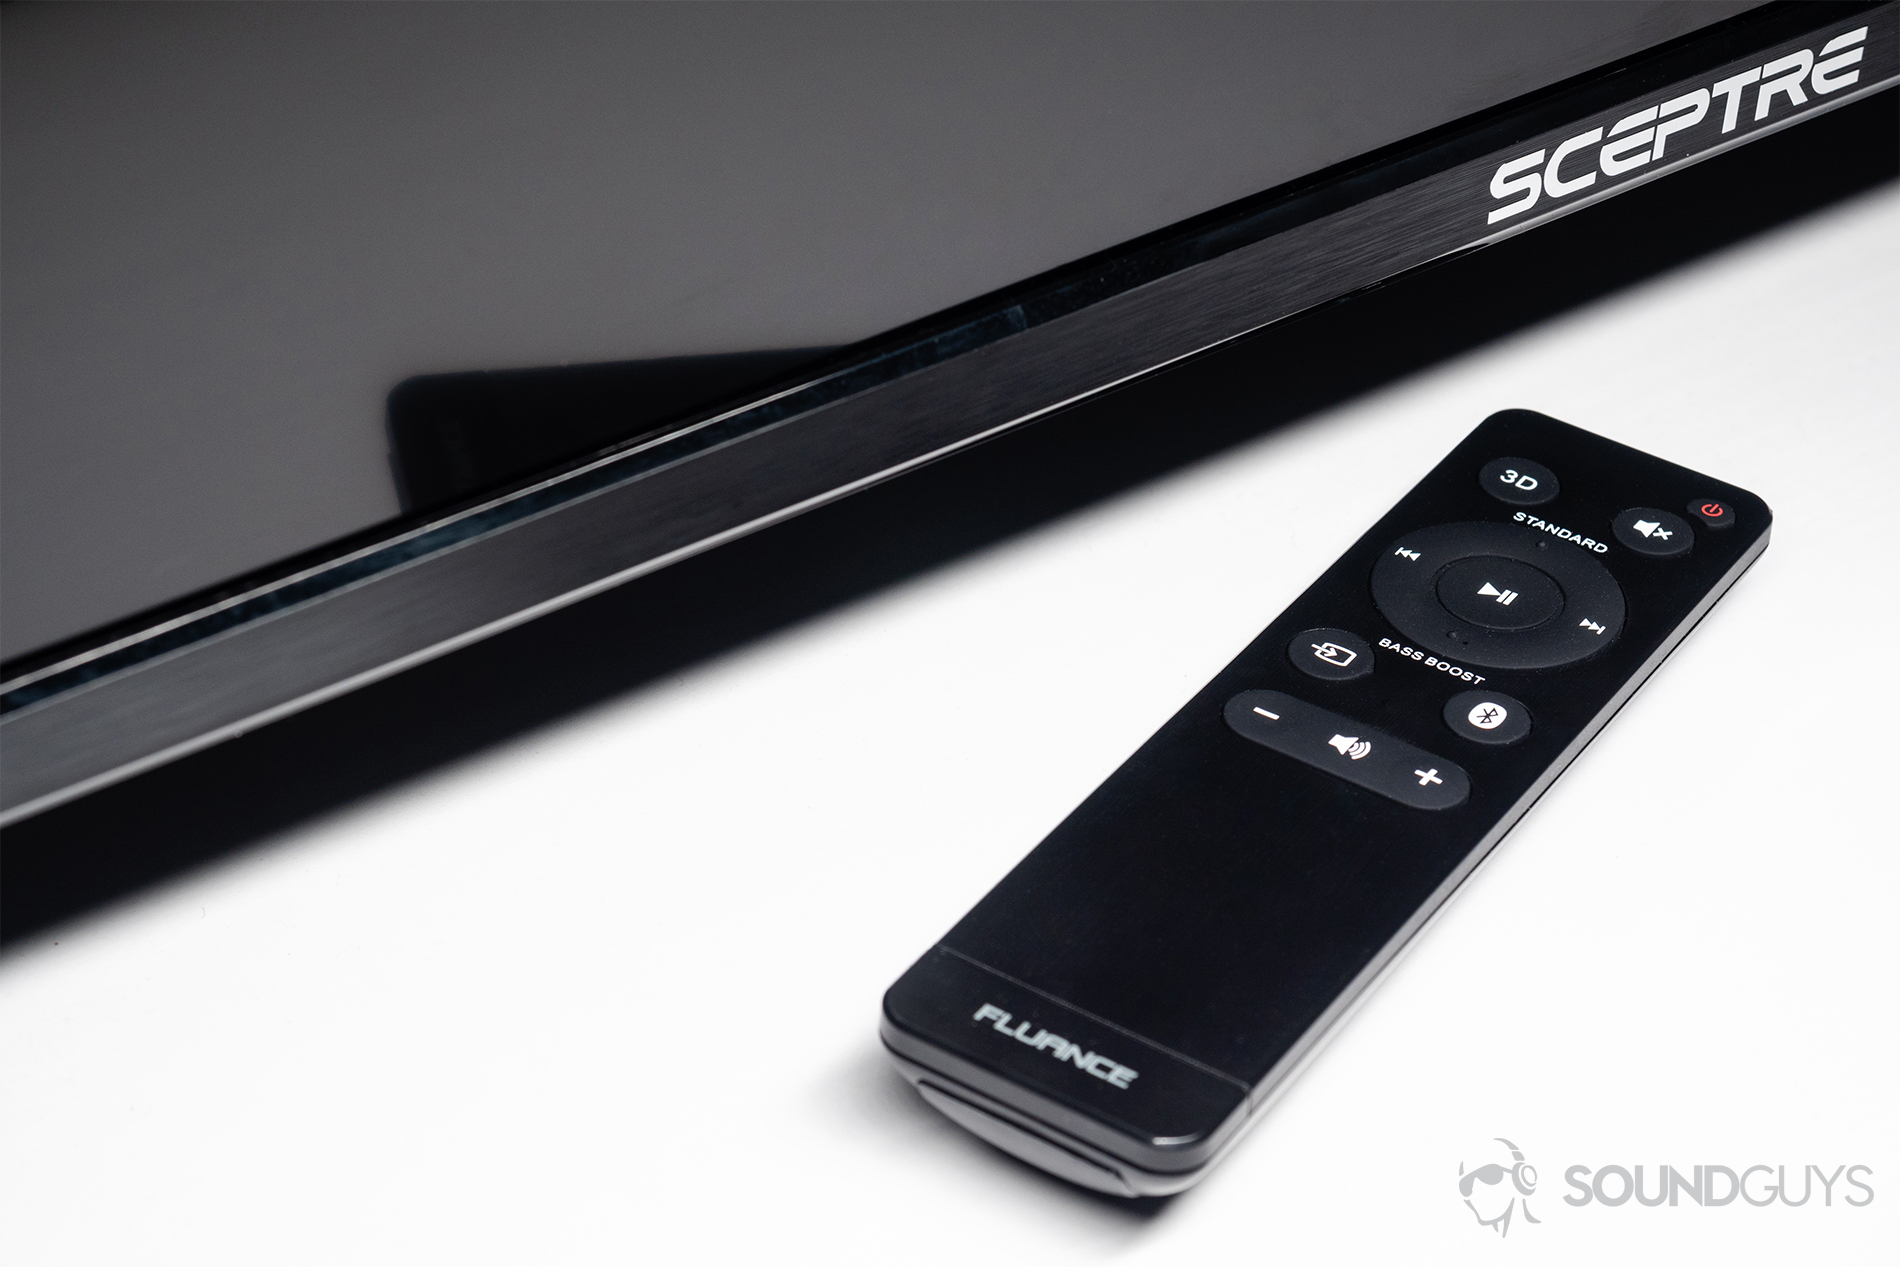 Fluance AB40 review: A top-down angled image of the Fluance remote nextto a Sceptre TV.